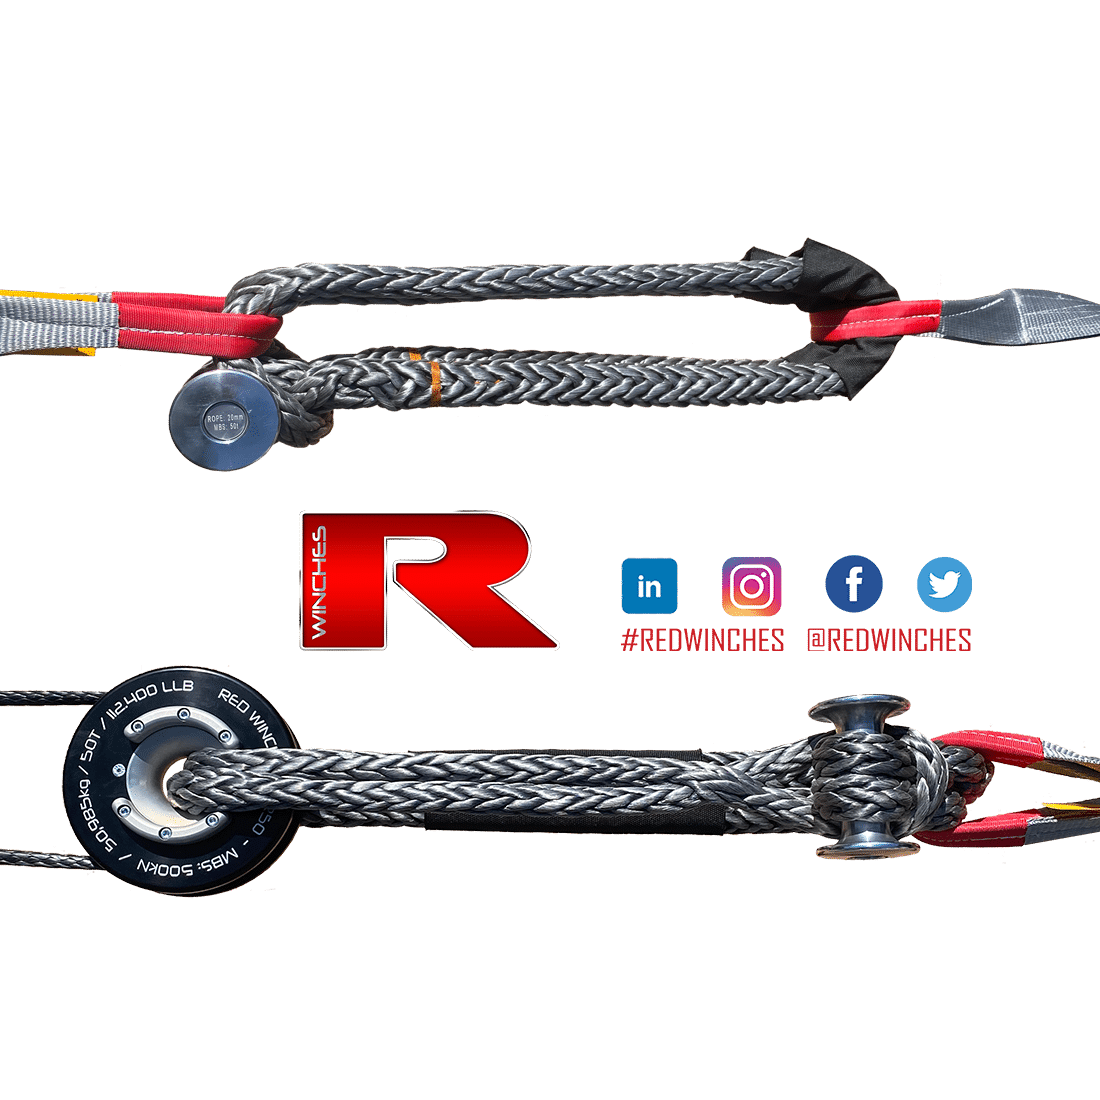 https://www.red-winches.com/wp-content/uploads/2021/05/SH20_RECOVERY_WEBSITE.png